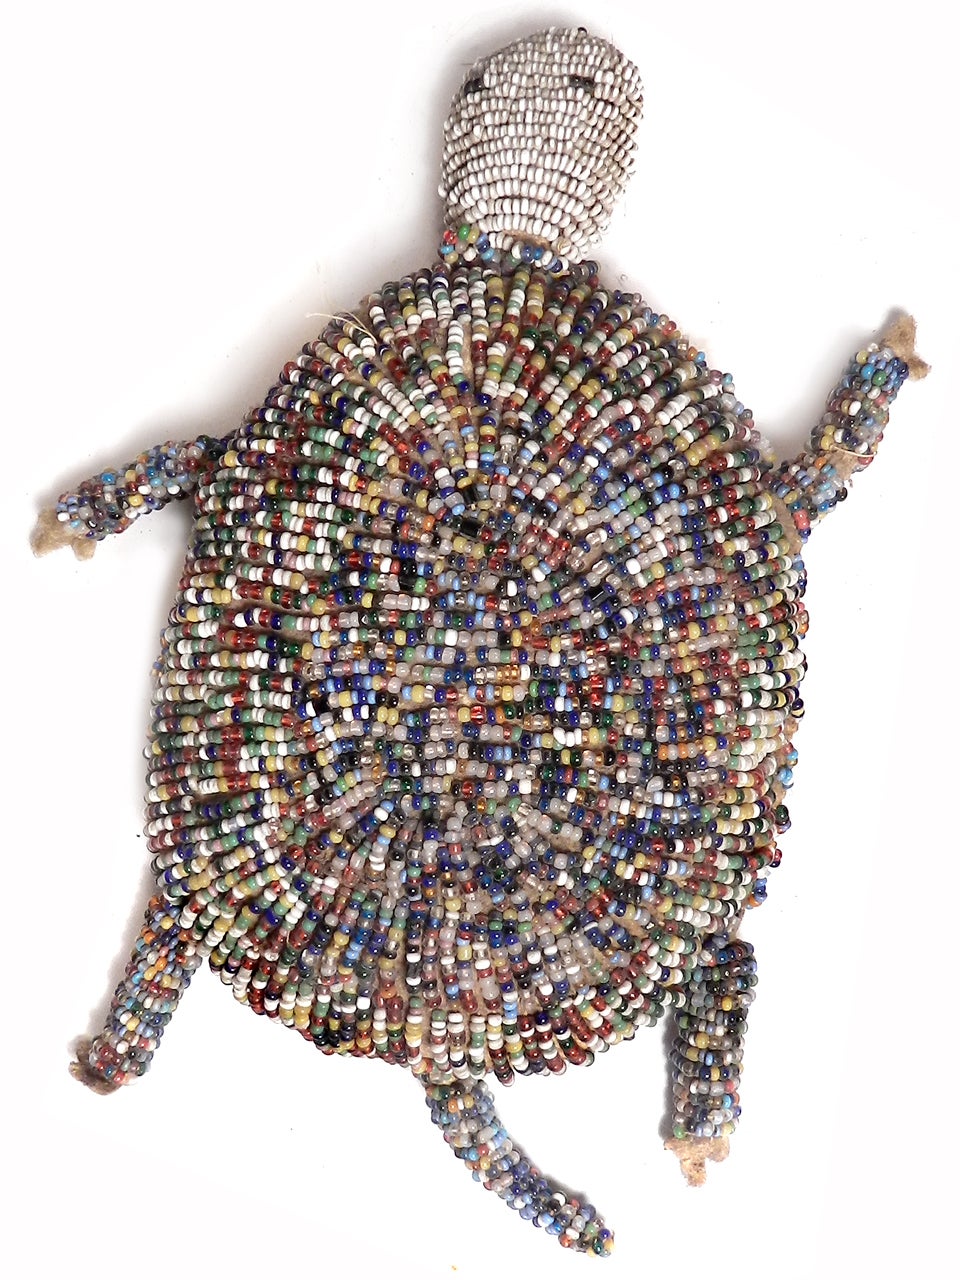 Early Sioux Indian Beaded Hide Turtle Fetish